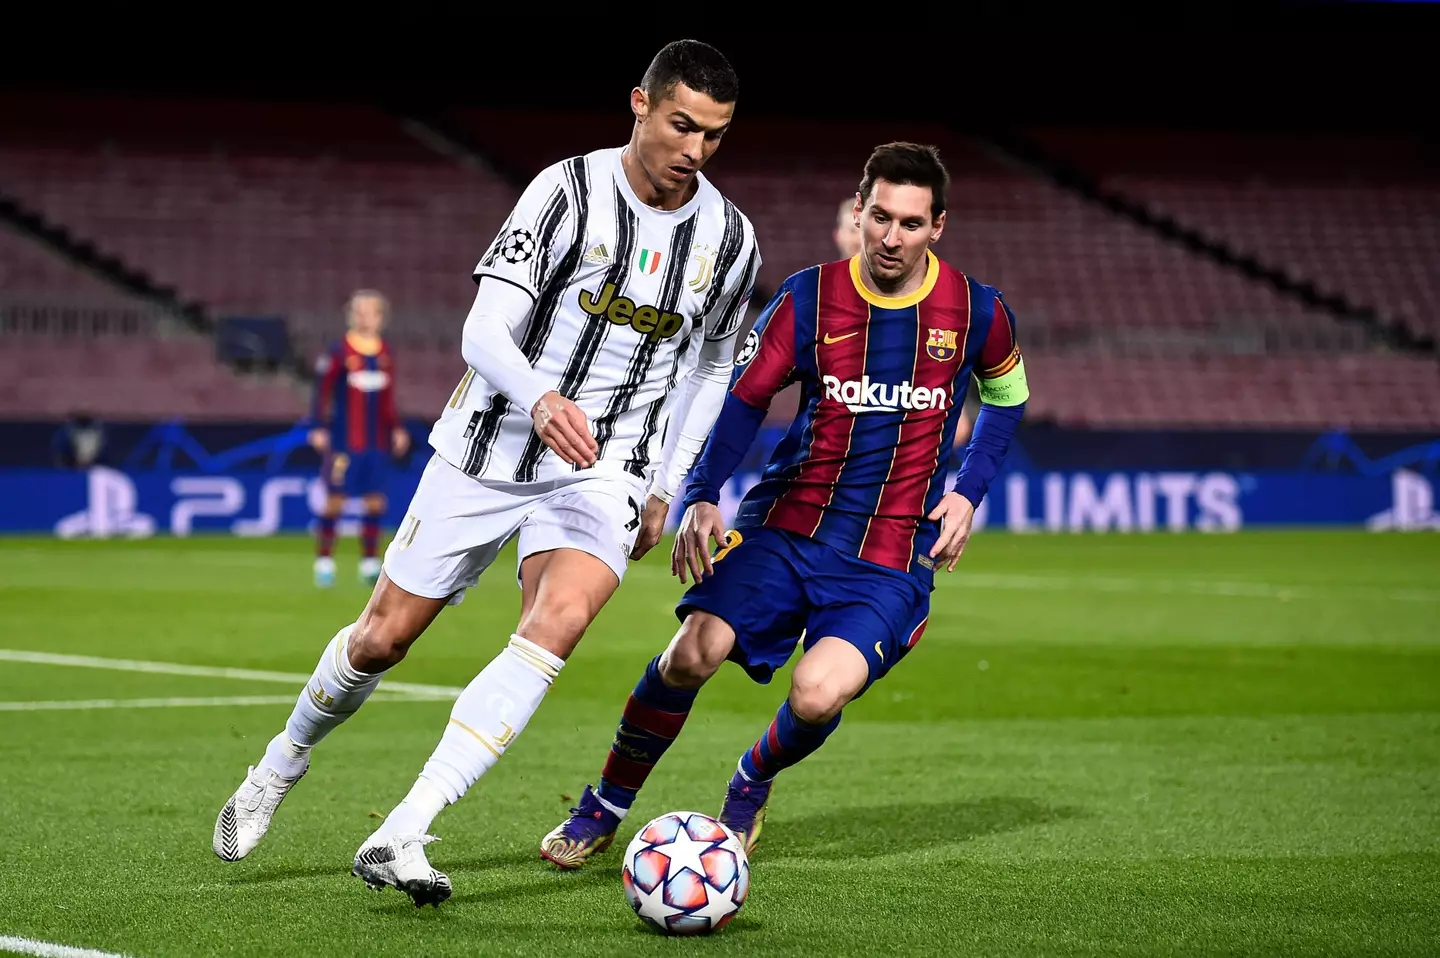 Cristiano Ronaldo and Lionel Messi are regarded as two of the best players of all time.